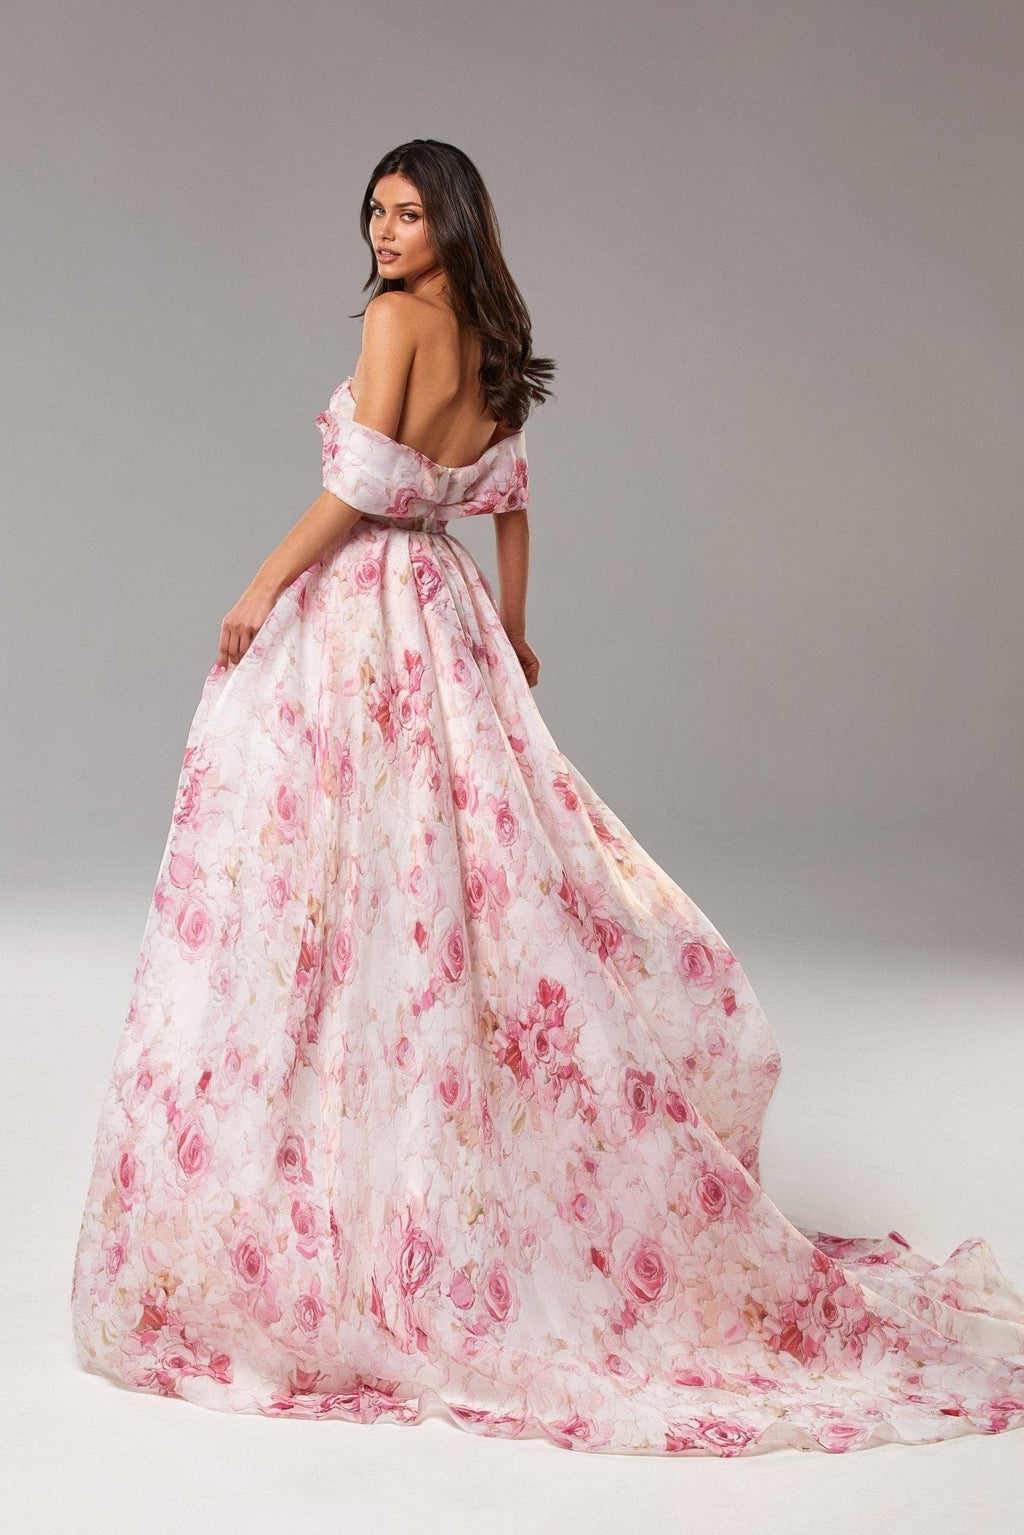 Pink Peony Chic off-the-shoulder floral maxi dress - Milla